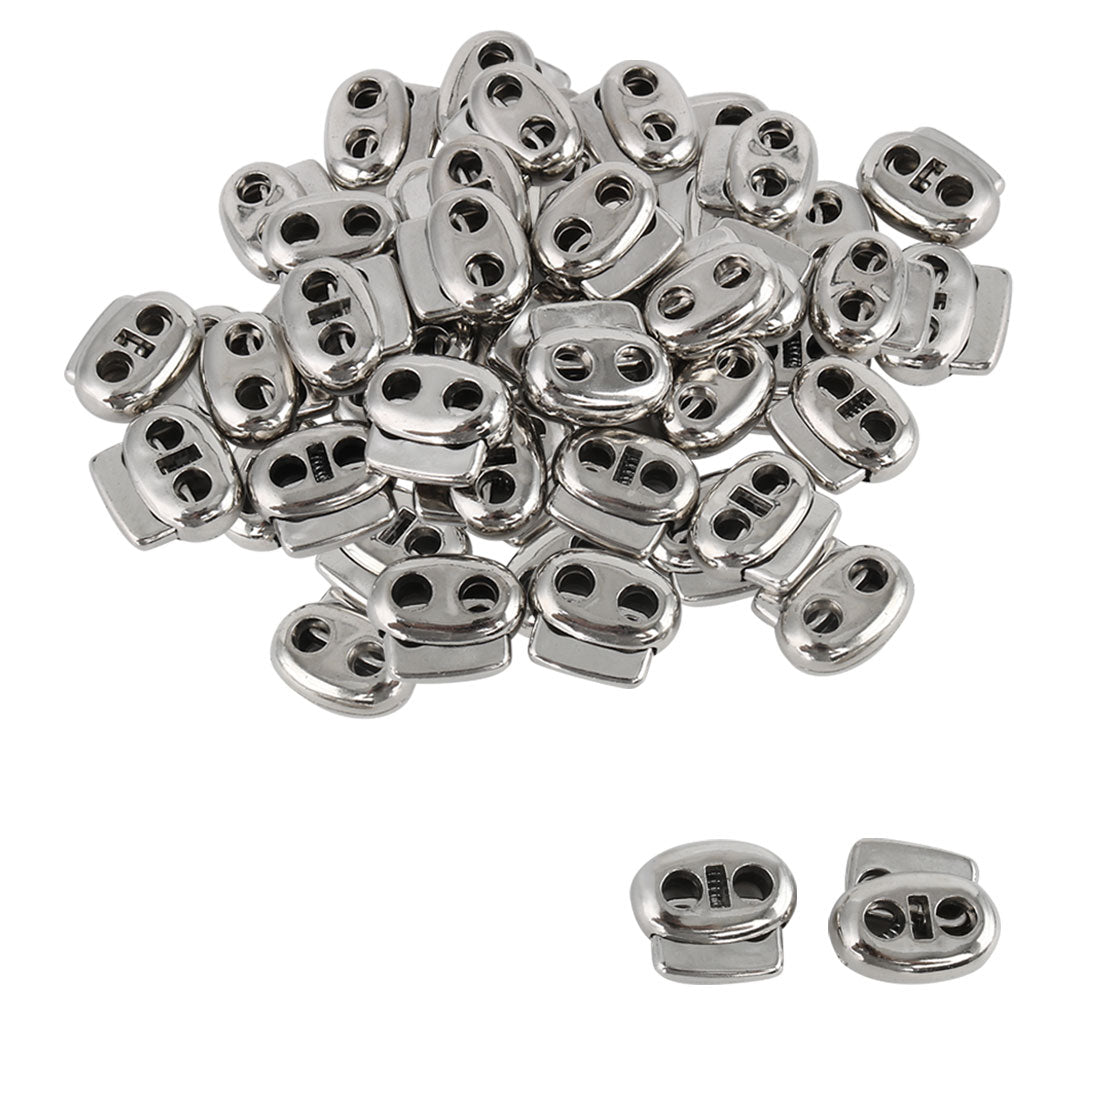 uxcell Uxcell 50 Pcs Plastic Cord Locks Double Hole End Spring Stopper Fastener, Silver Tone